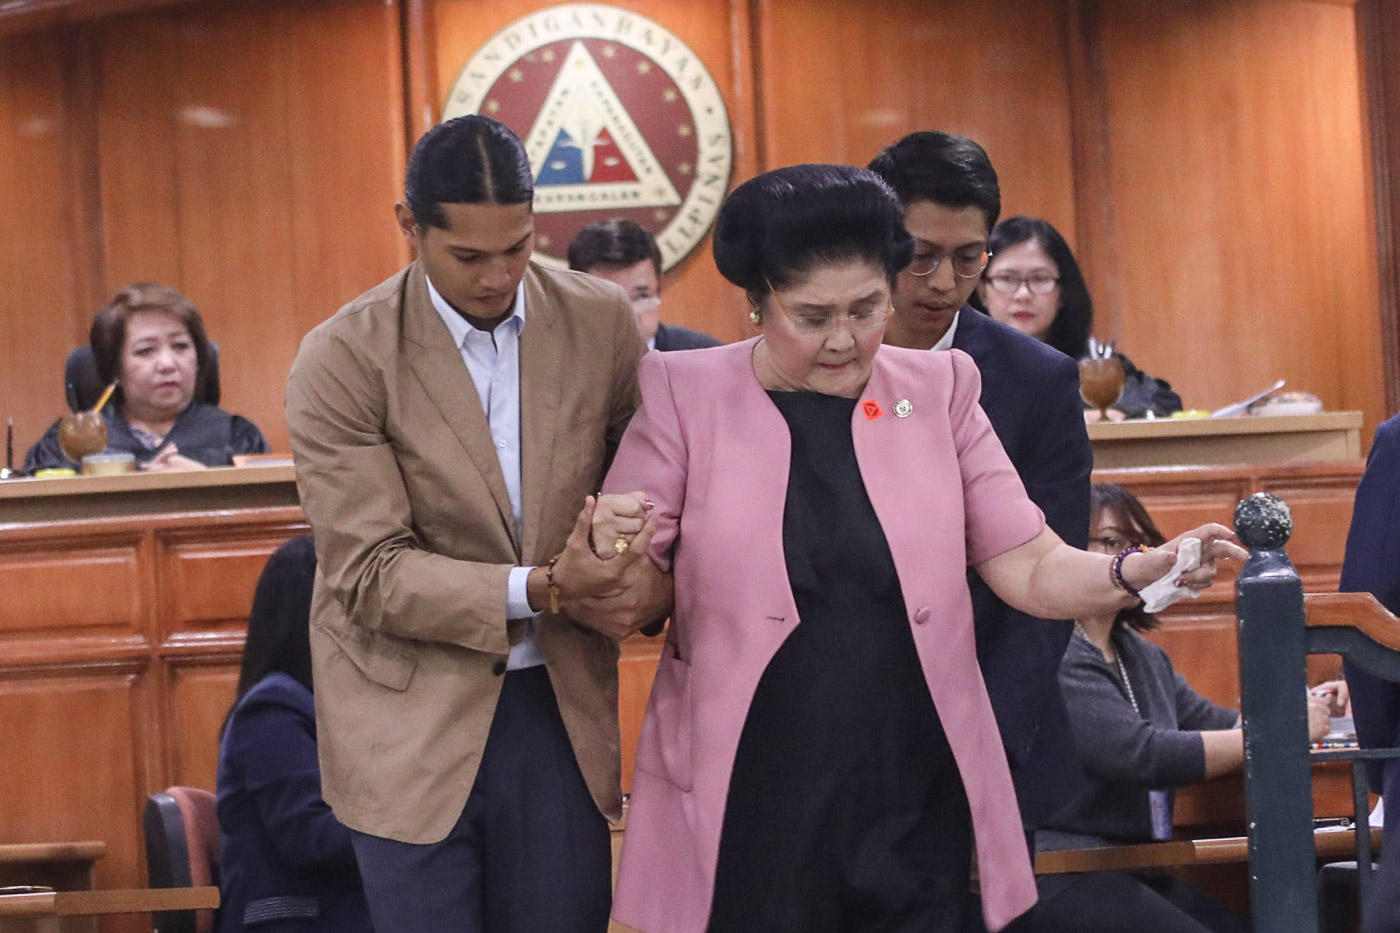 IRON BUTTERFLY NO MORE. Former first lady and now Ilocos Norte Representative Imelda Marcos arrives at the Sandiganbayan on November 16, 2018, to file for motion for leave of court to avail of post conviction remedies. Photo by Darren Langit/Rappler    